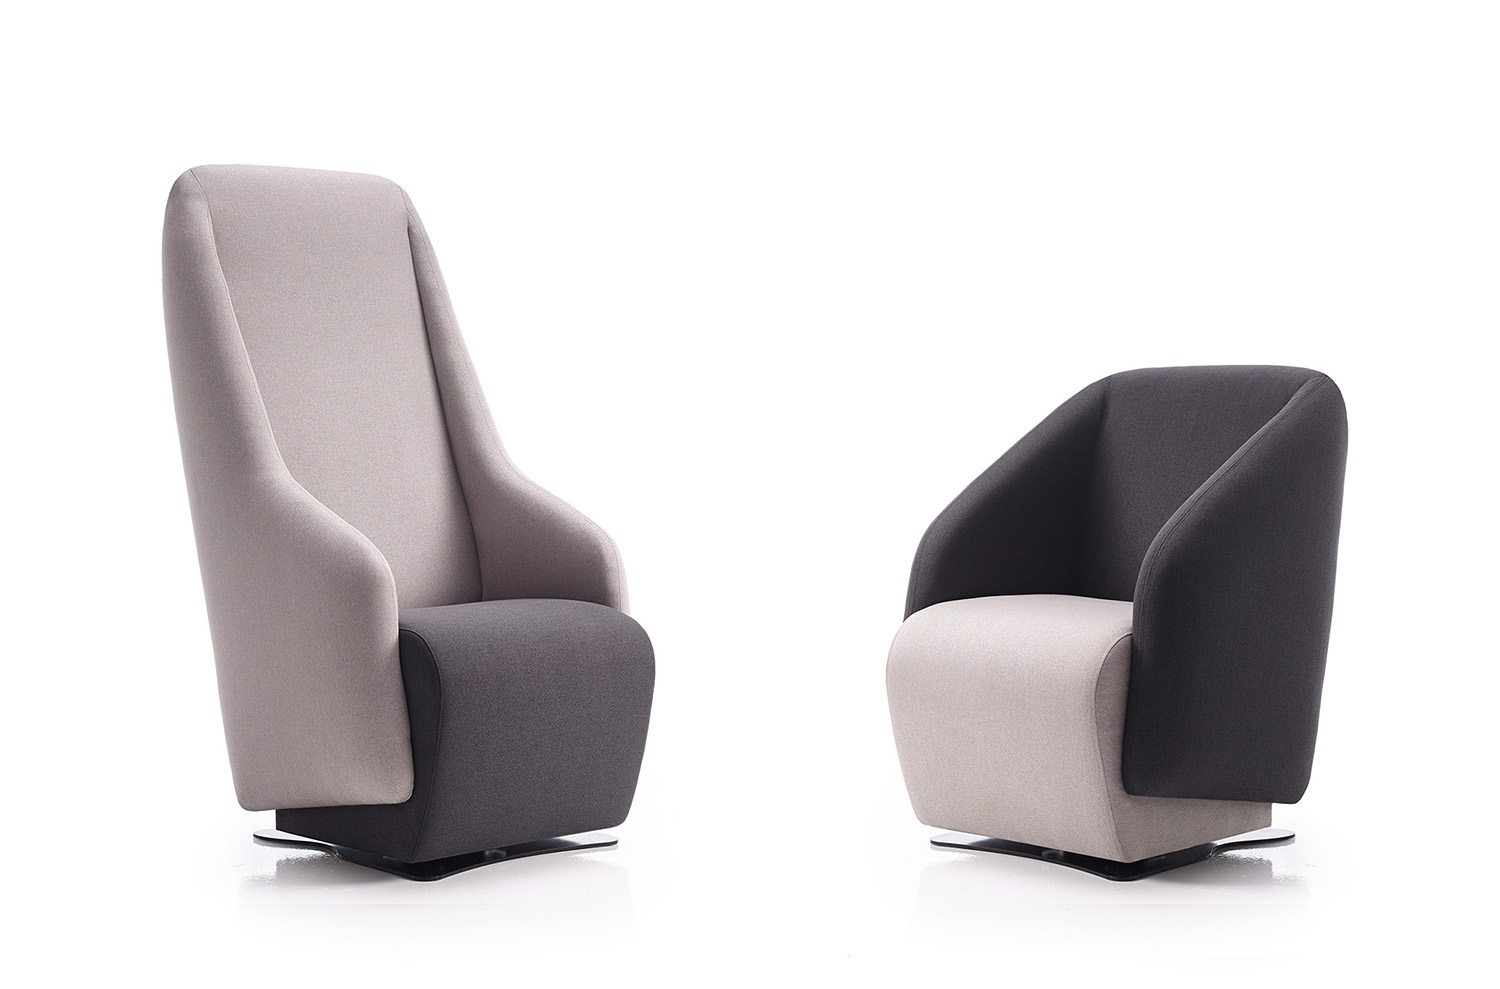 The Lily Armchair by Beltà and Frajumar